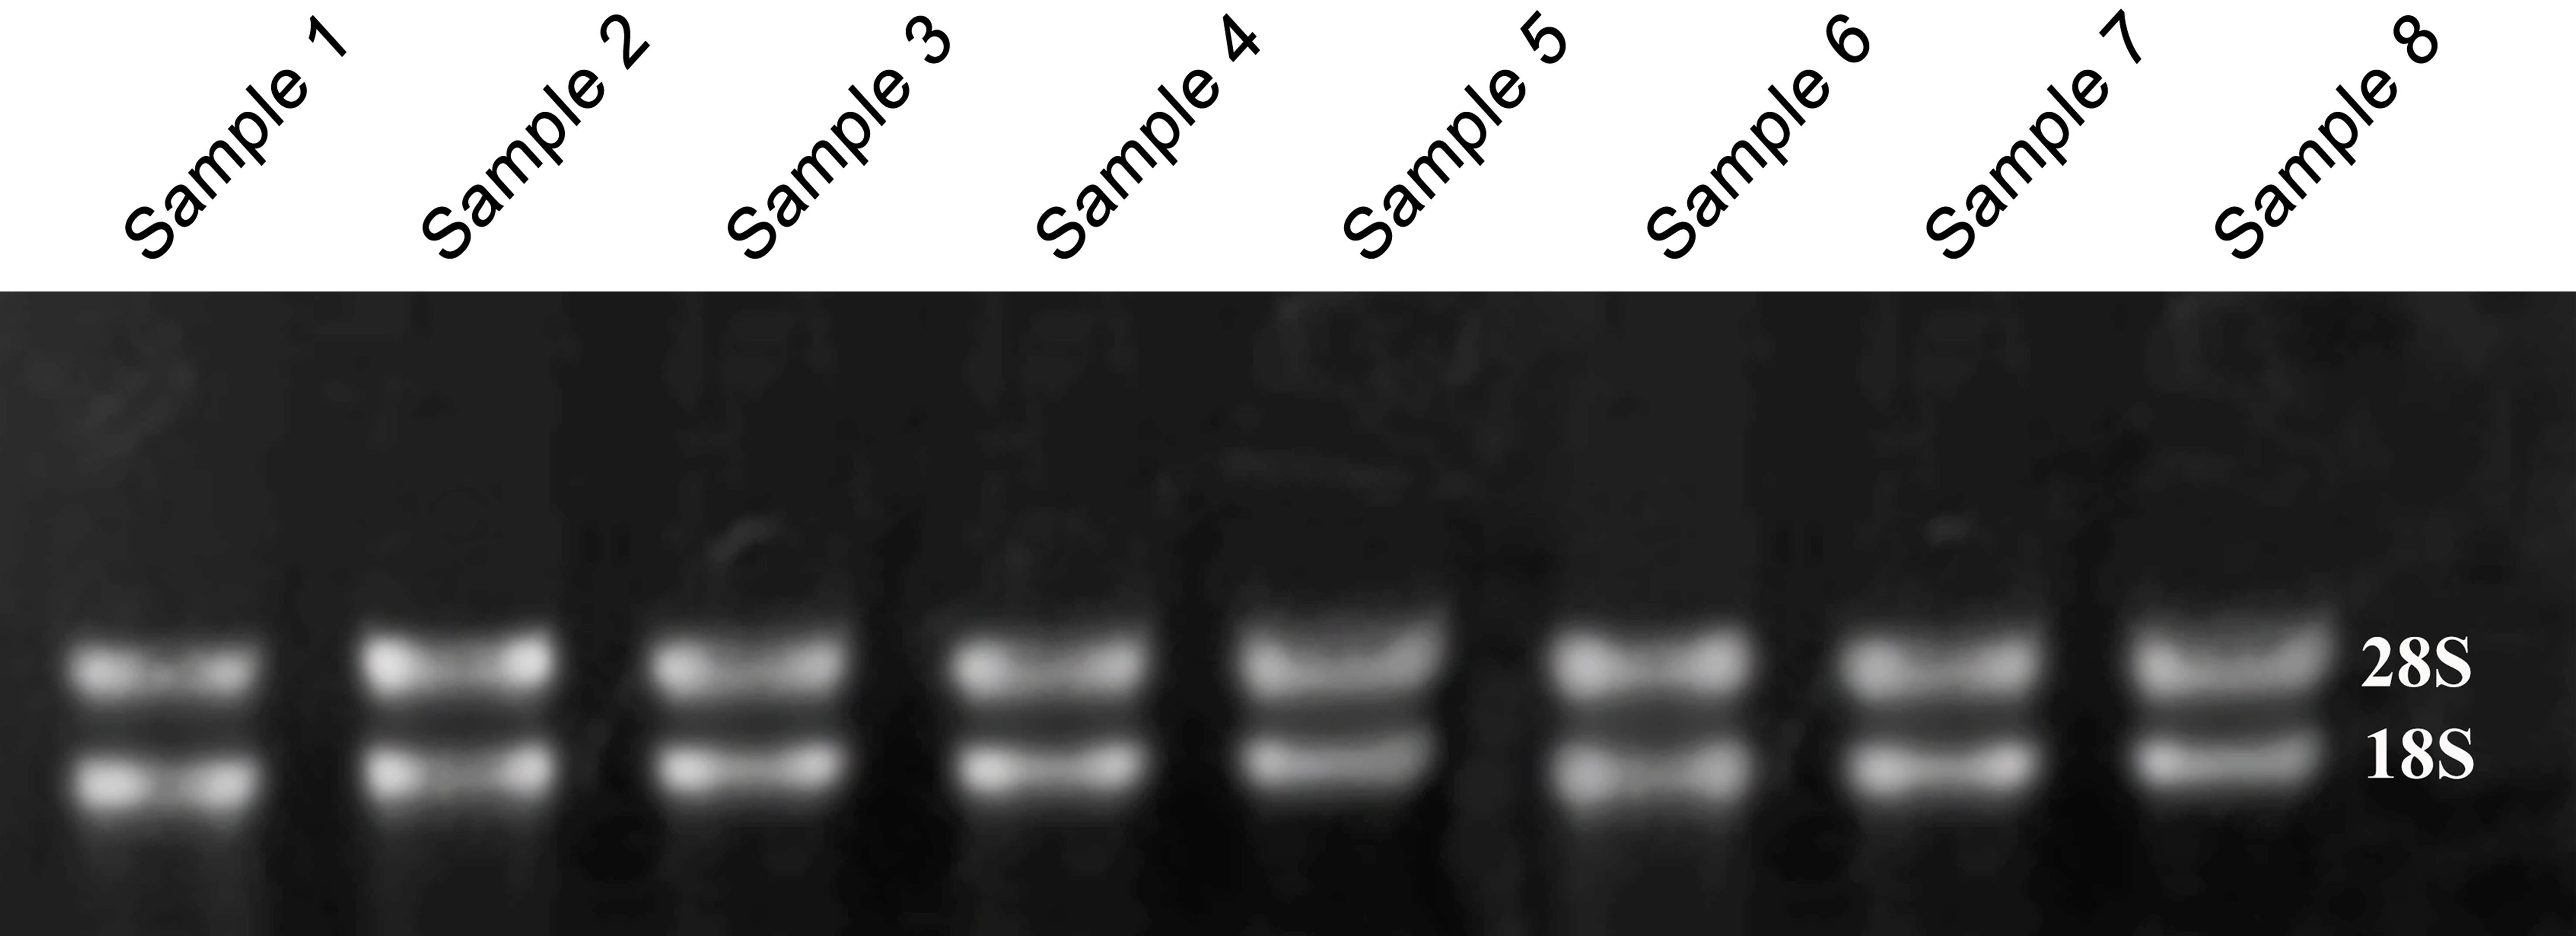 Eight samples of total RNA extracted from testes of Kermani sheep on agarose gel.